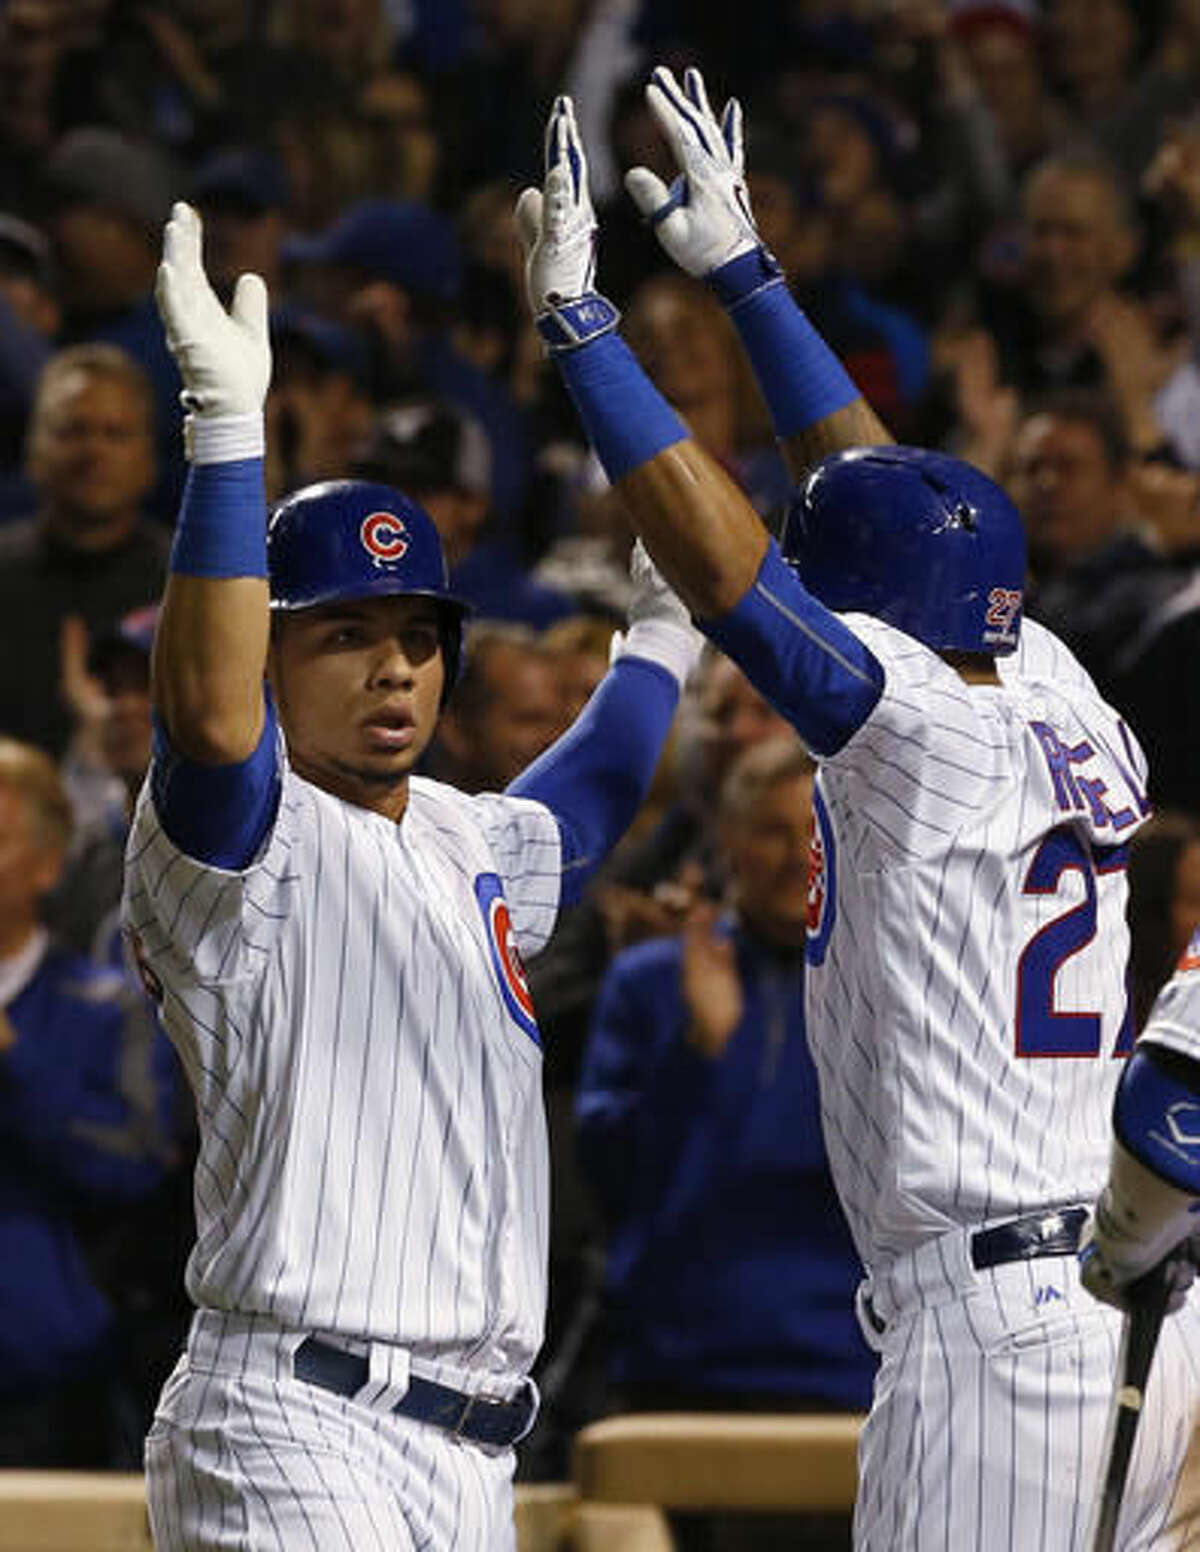 Chicago Cubs' Willson Contreras, left, celebrates with Addison Russell after hitting a home run during the fourth inning of Game 6 of the National League baseball championship series against the Los Angeles Dodgers, Saturday, Oct. 22, 2016, in Chicago. (AP Photo/Nam Y. Huh)